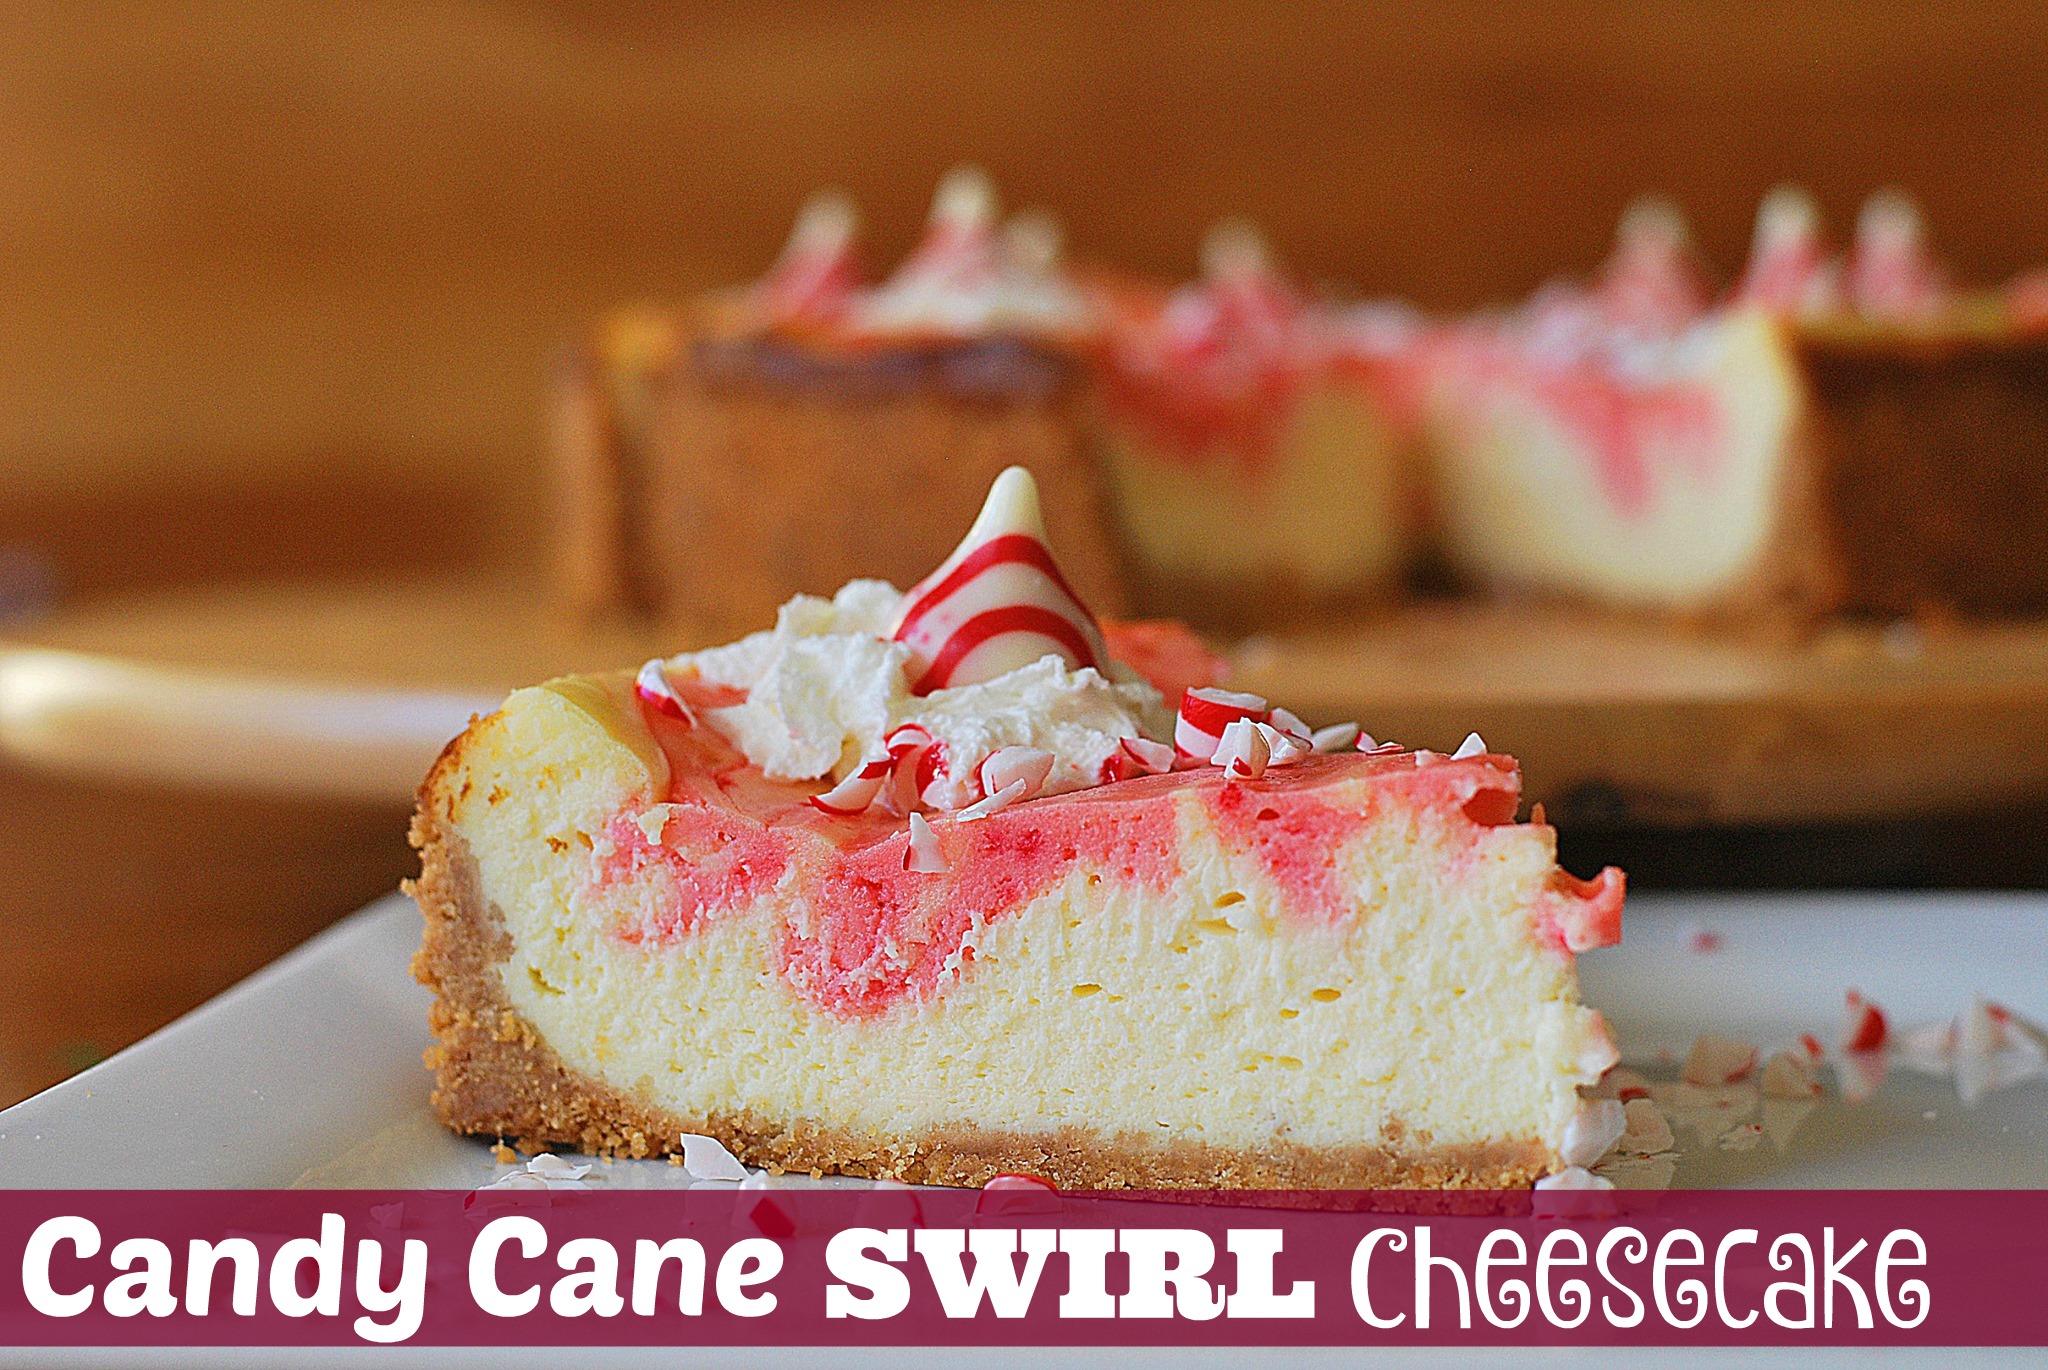 Candy Cane Swirl Cheesecake - Aunt Bee's Recipes.